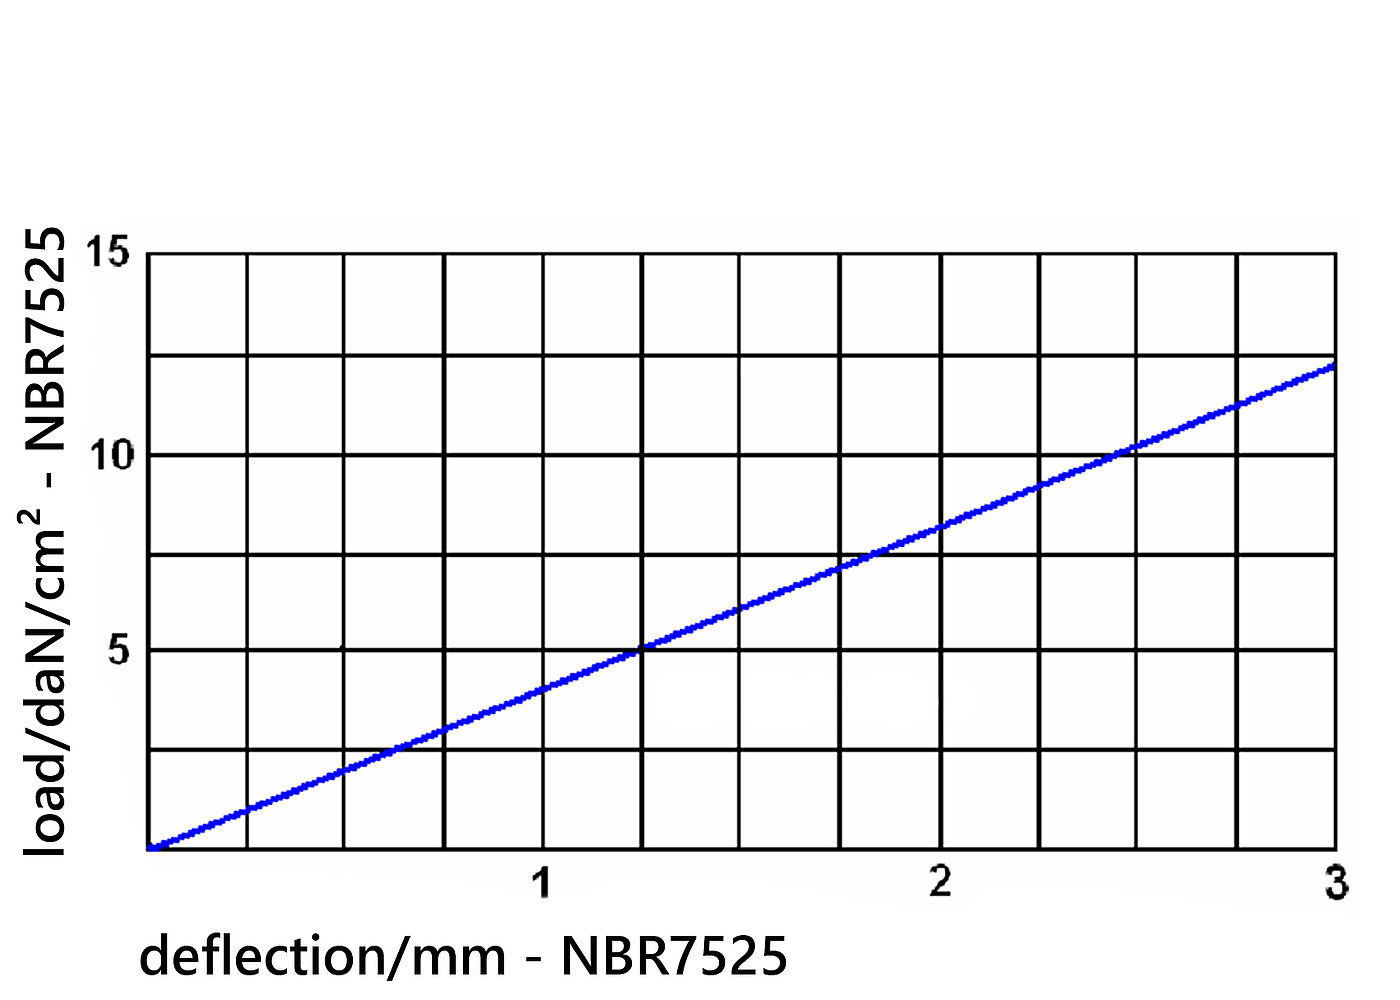 diagramme of the deflection of the elastomer board NBR7525 under load 